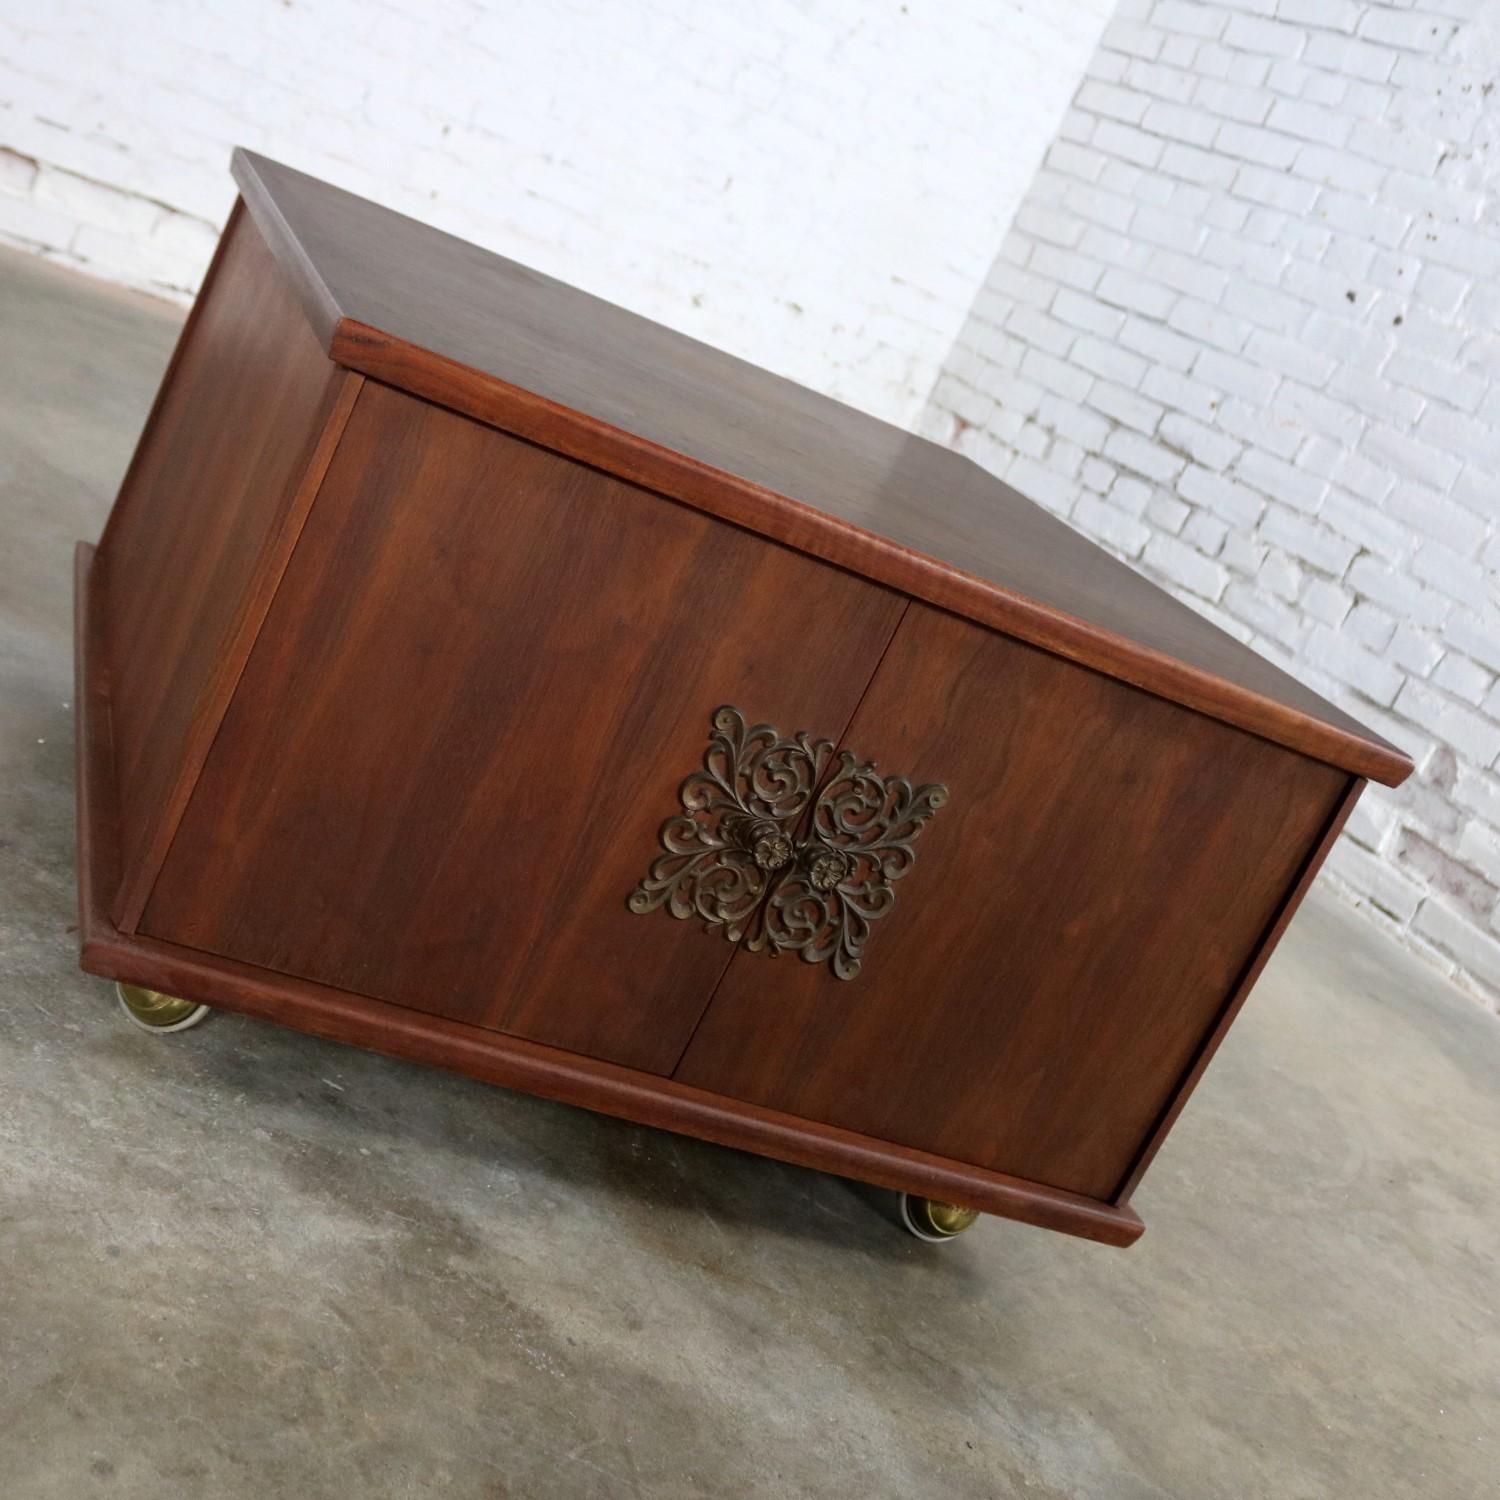 Handsome square midcentury rolling end table storage cabinet on brass ball casters with double opening doors with beautiful brass scrollwork escutcheons and pulls. This side table storage cabinet is in excellent vintage condition with no outstanding